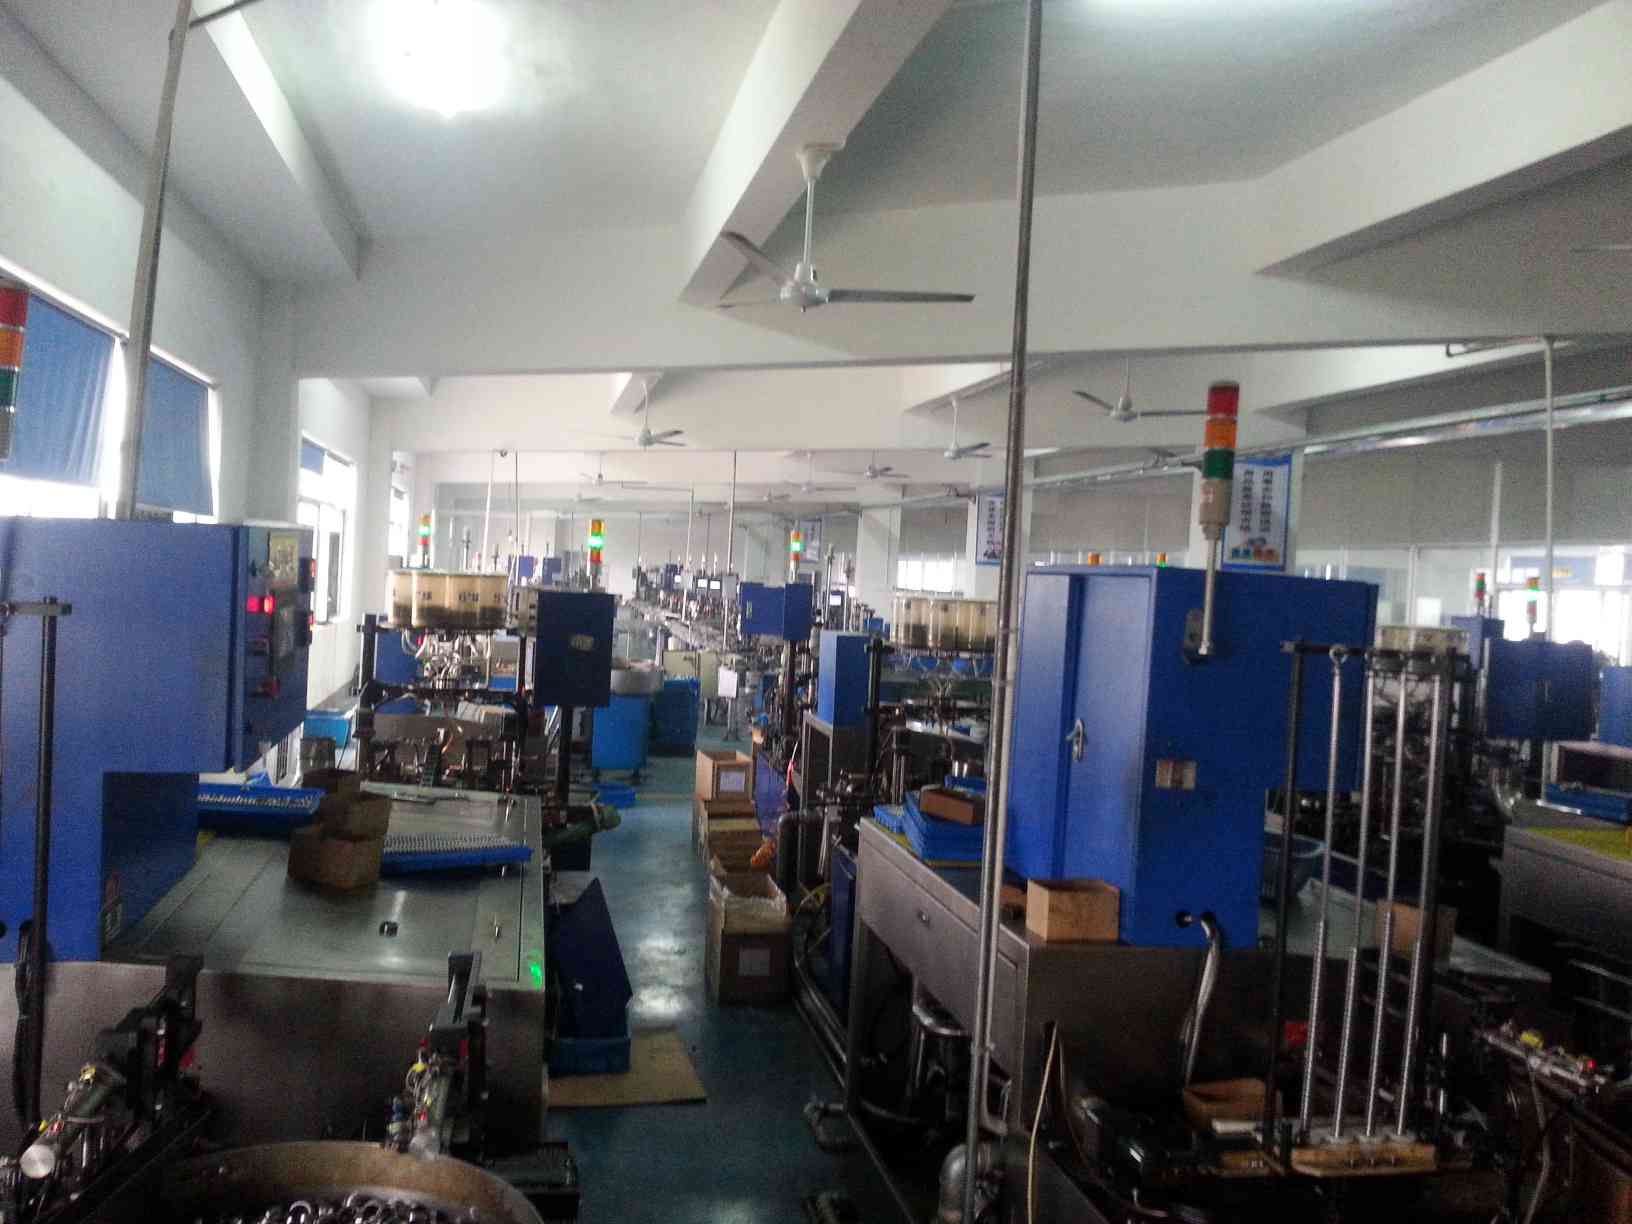 Our Factory

